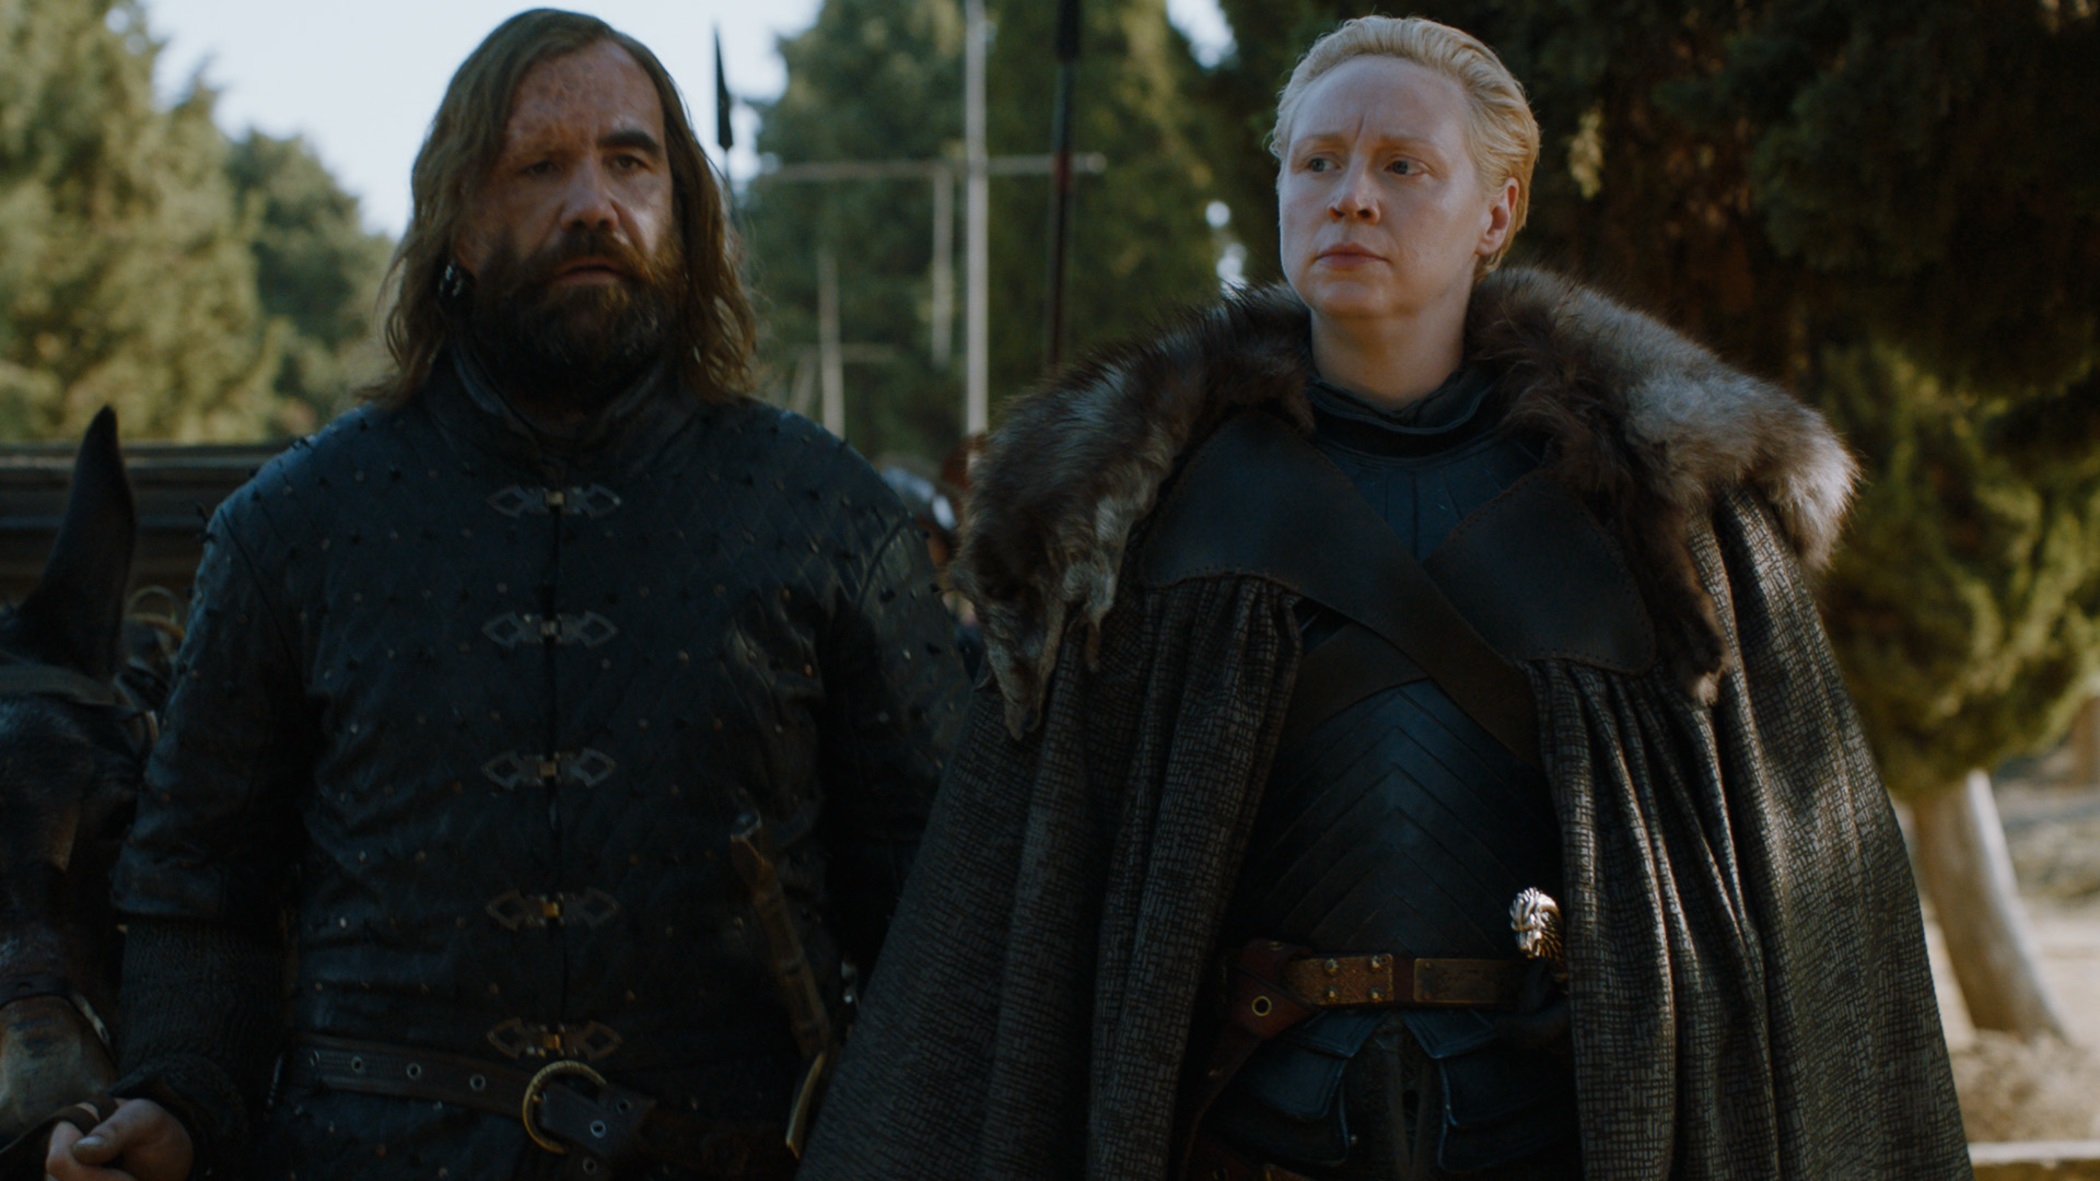 Brienne and the Hound Dragonpit